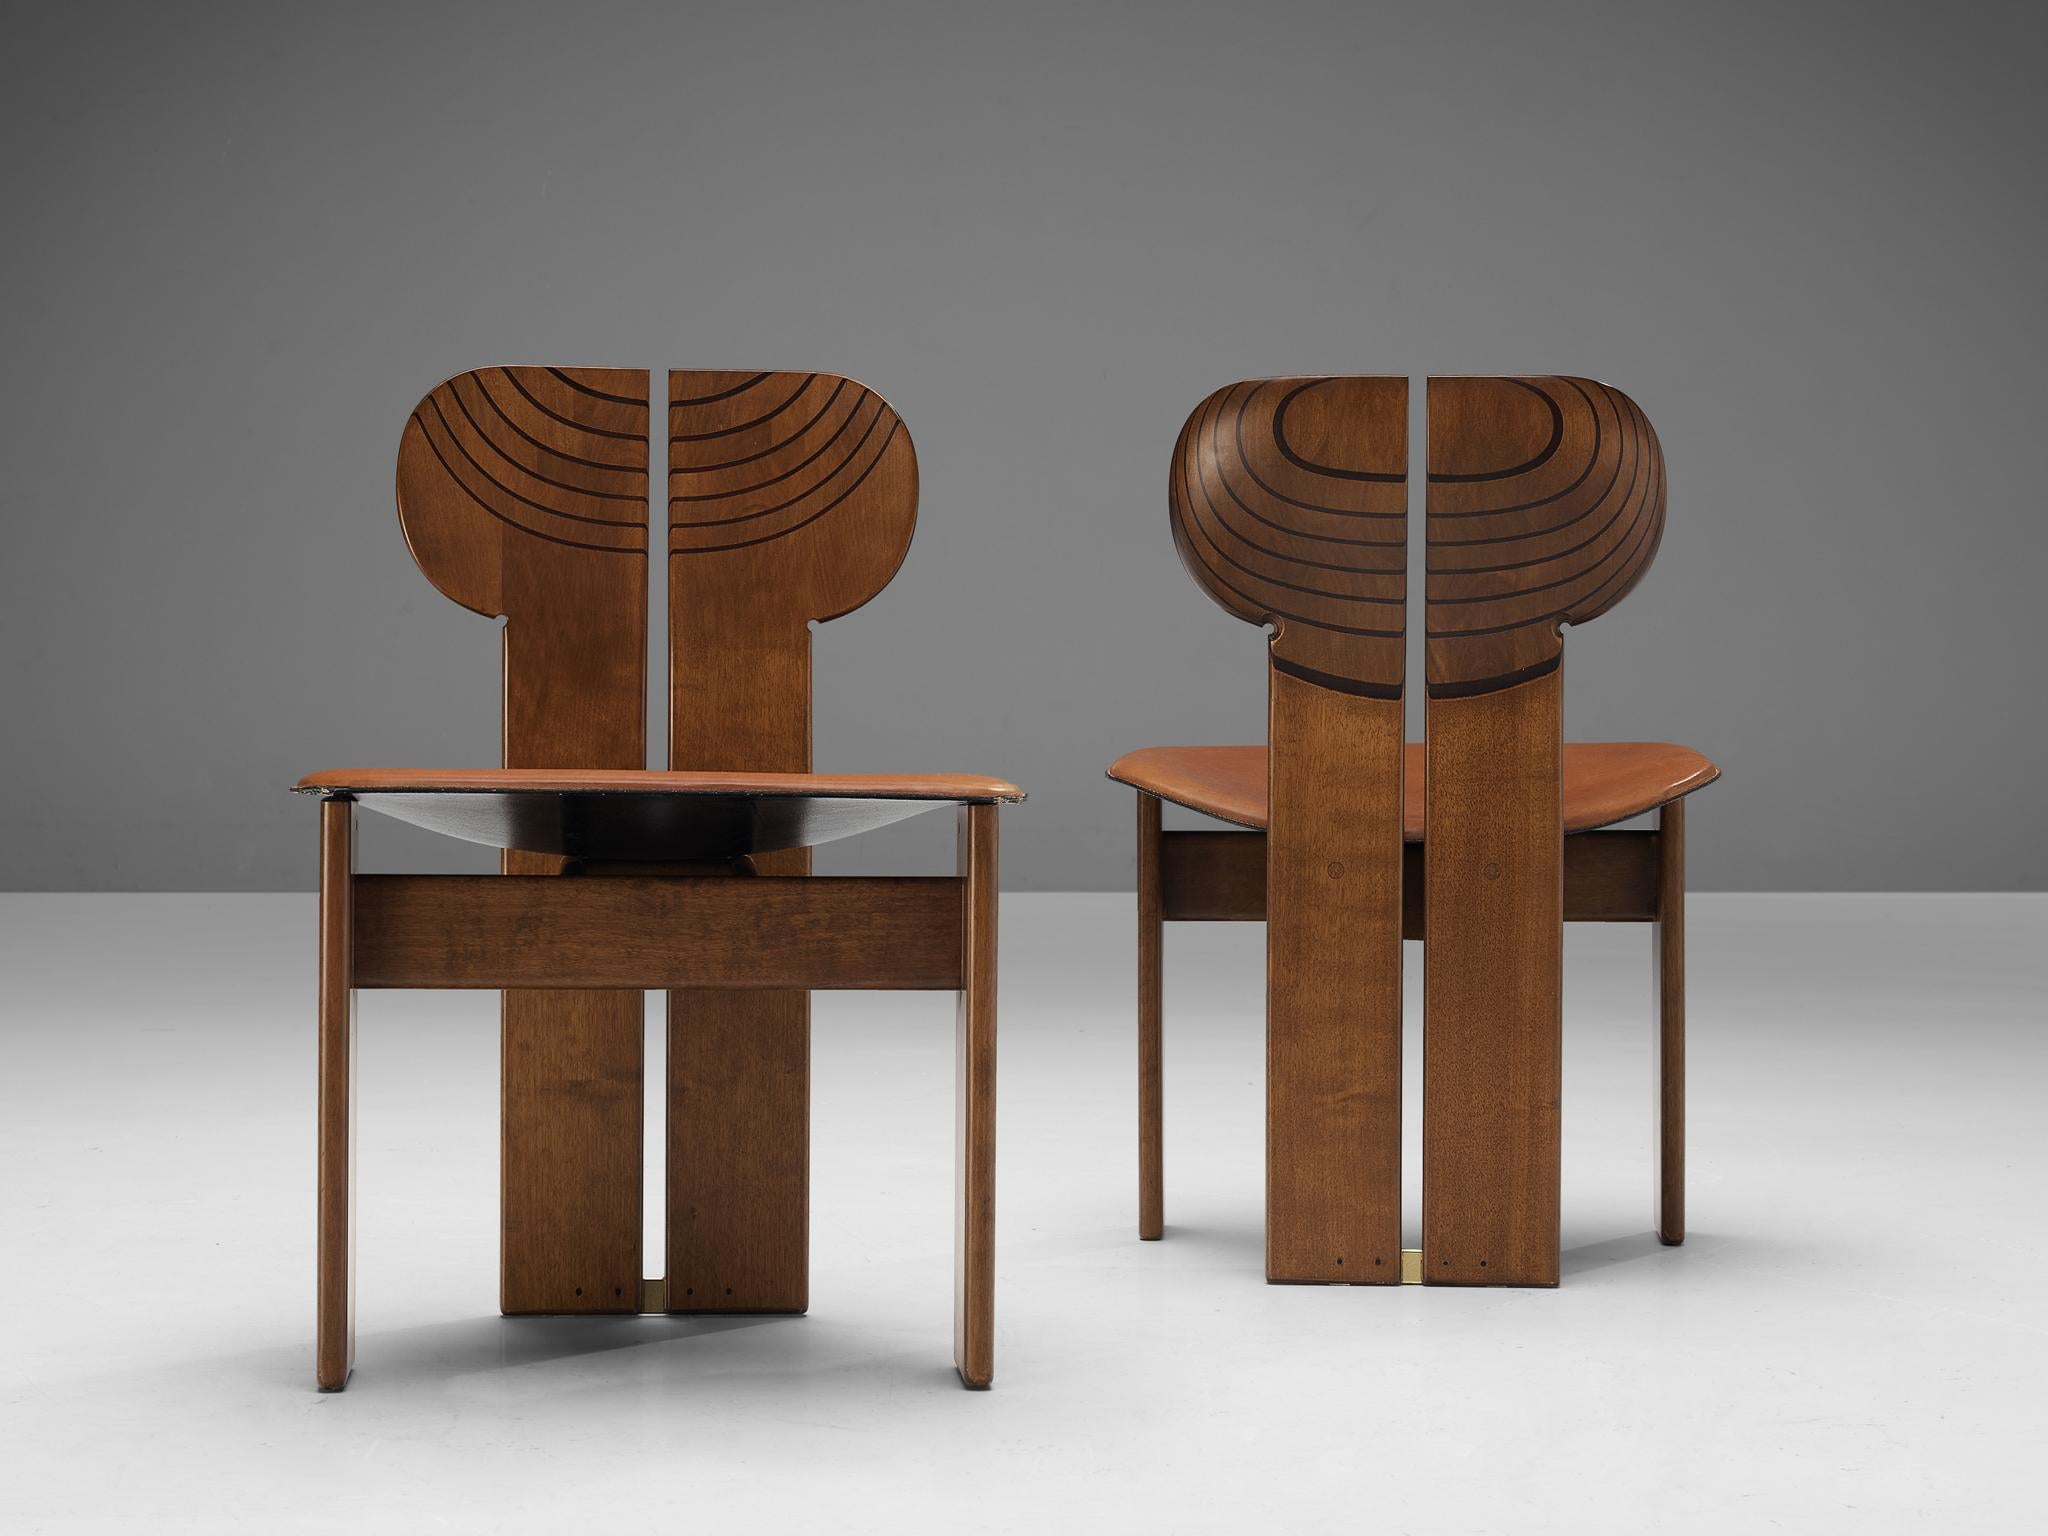 Afra & Tobia Scarpa for Maxalto, dining chairs model 'Africa', cognac leather, in walnut, ebony and brass, Italy, 1975.

This pair of 'Africa' chairs explicitly sculptural grand chairs is designed by Afra & Tobia Scarpa. They are part of the